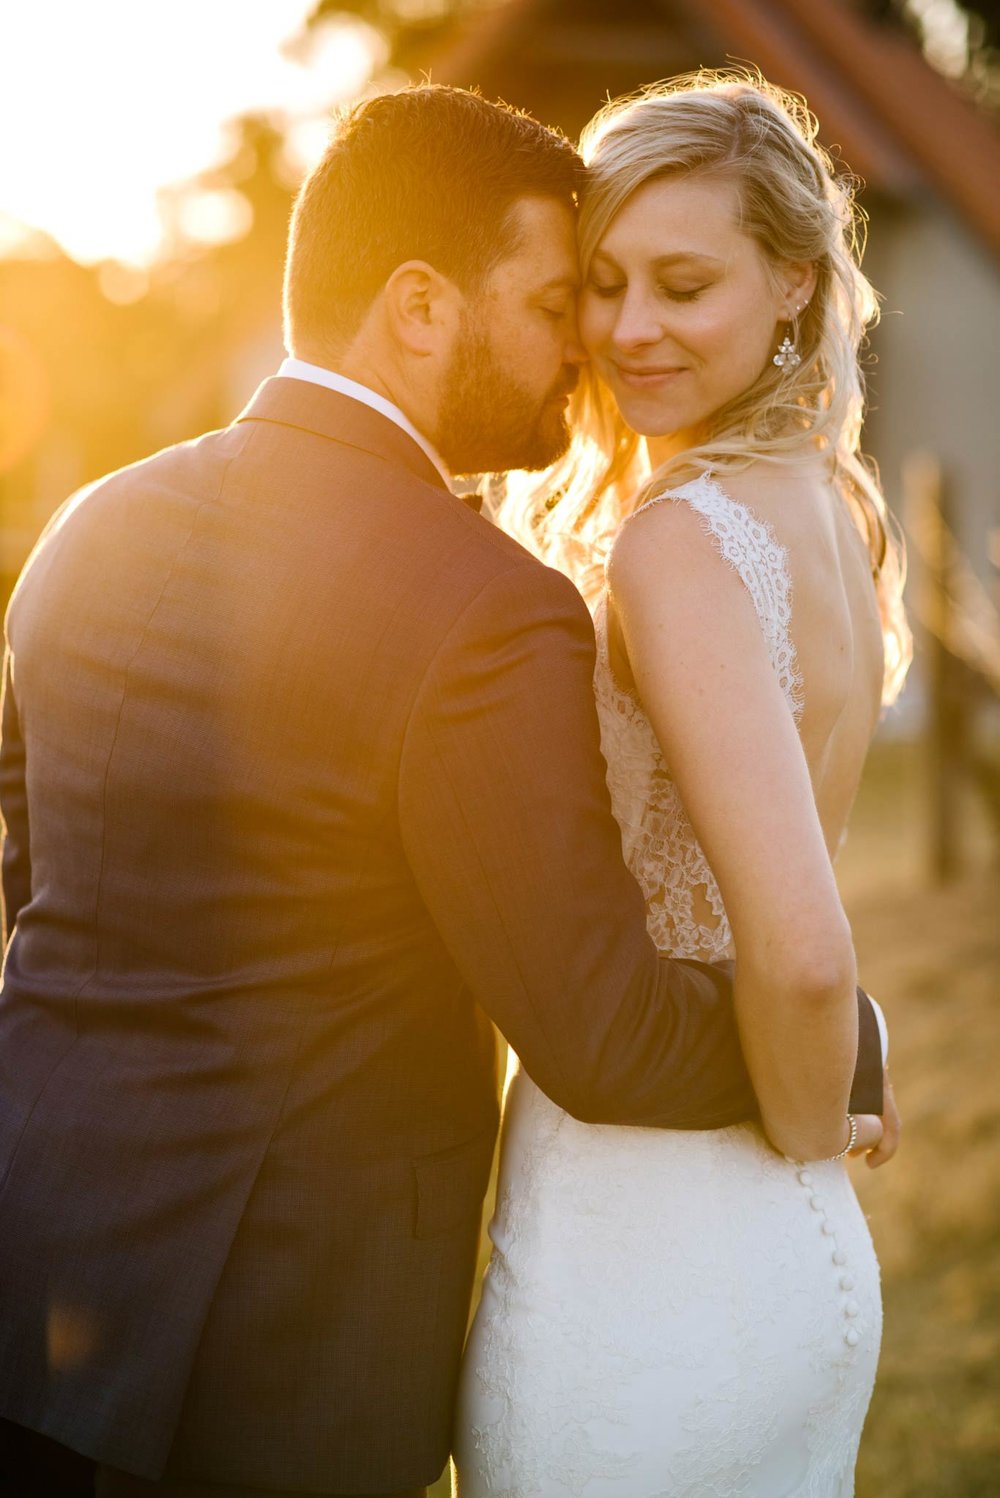 Backlit portrait of bride and groom with eyes closed